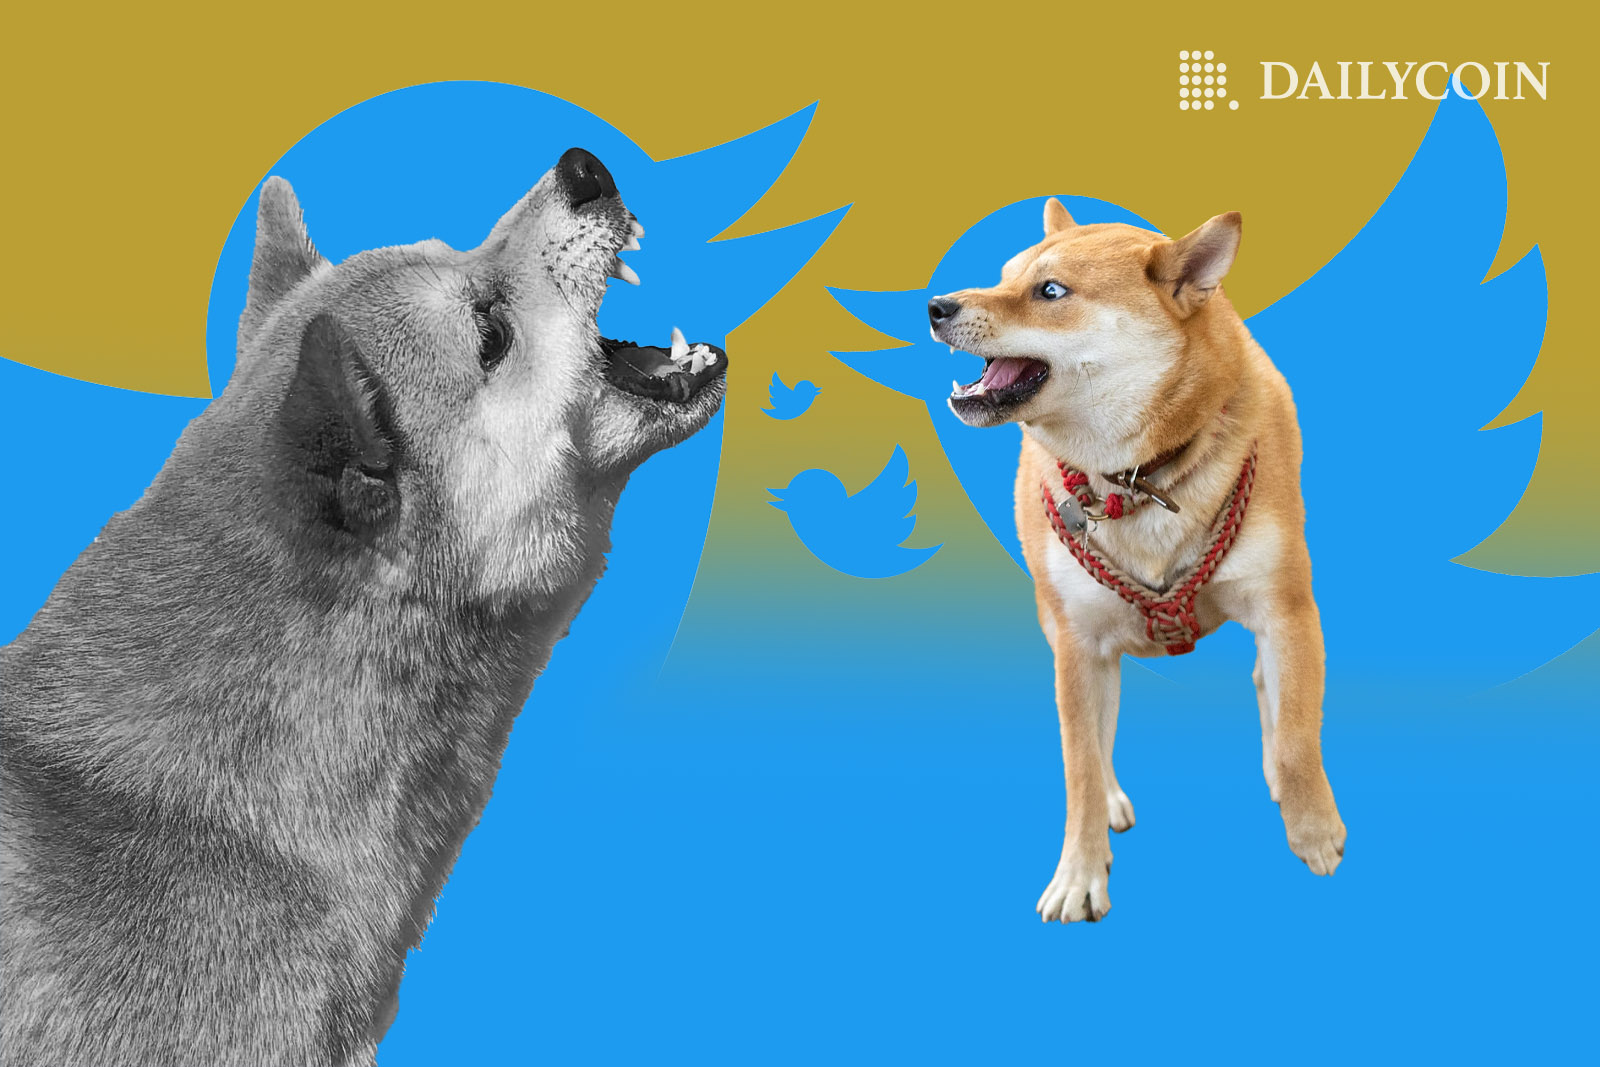 Dogecoin (DOGE) Founder Takes A Jab At Shiba Inu (SHIB) On Twitter